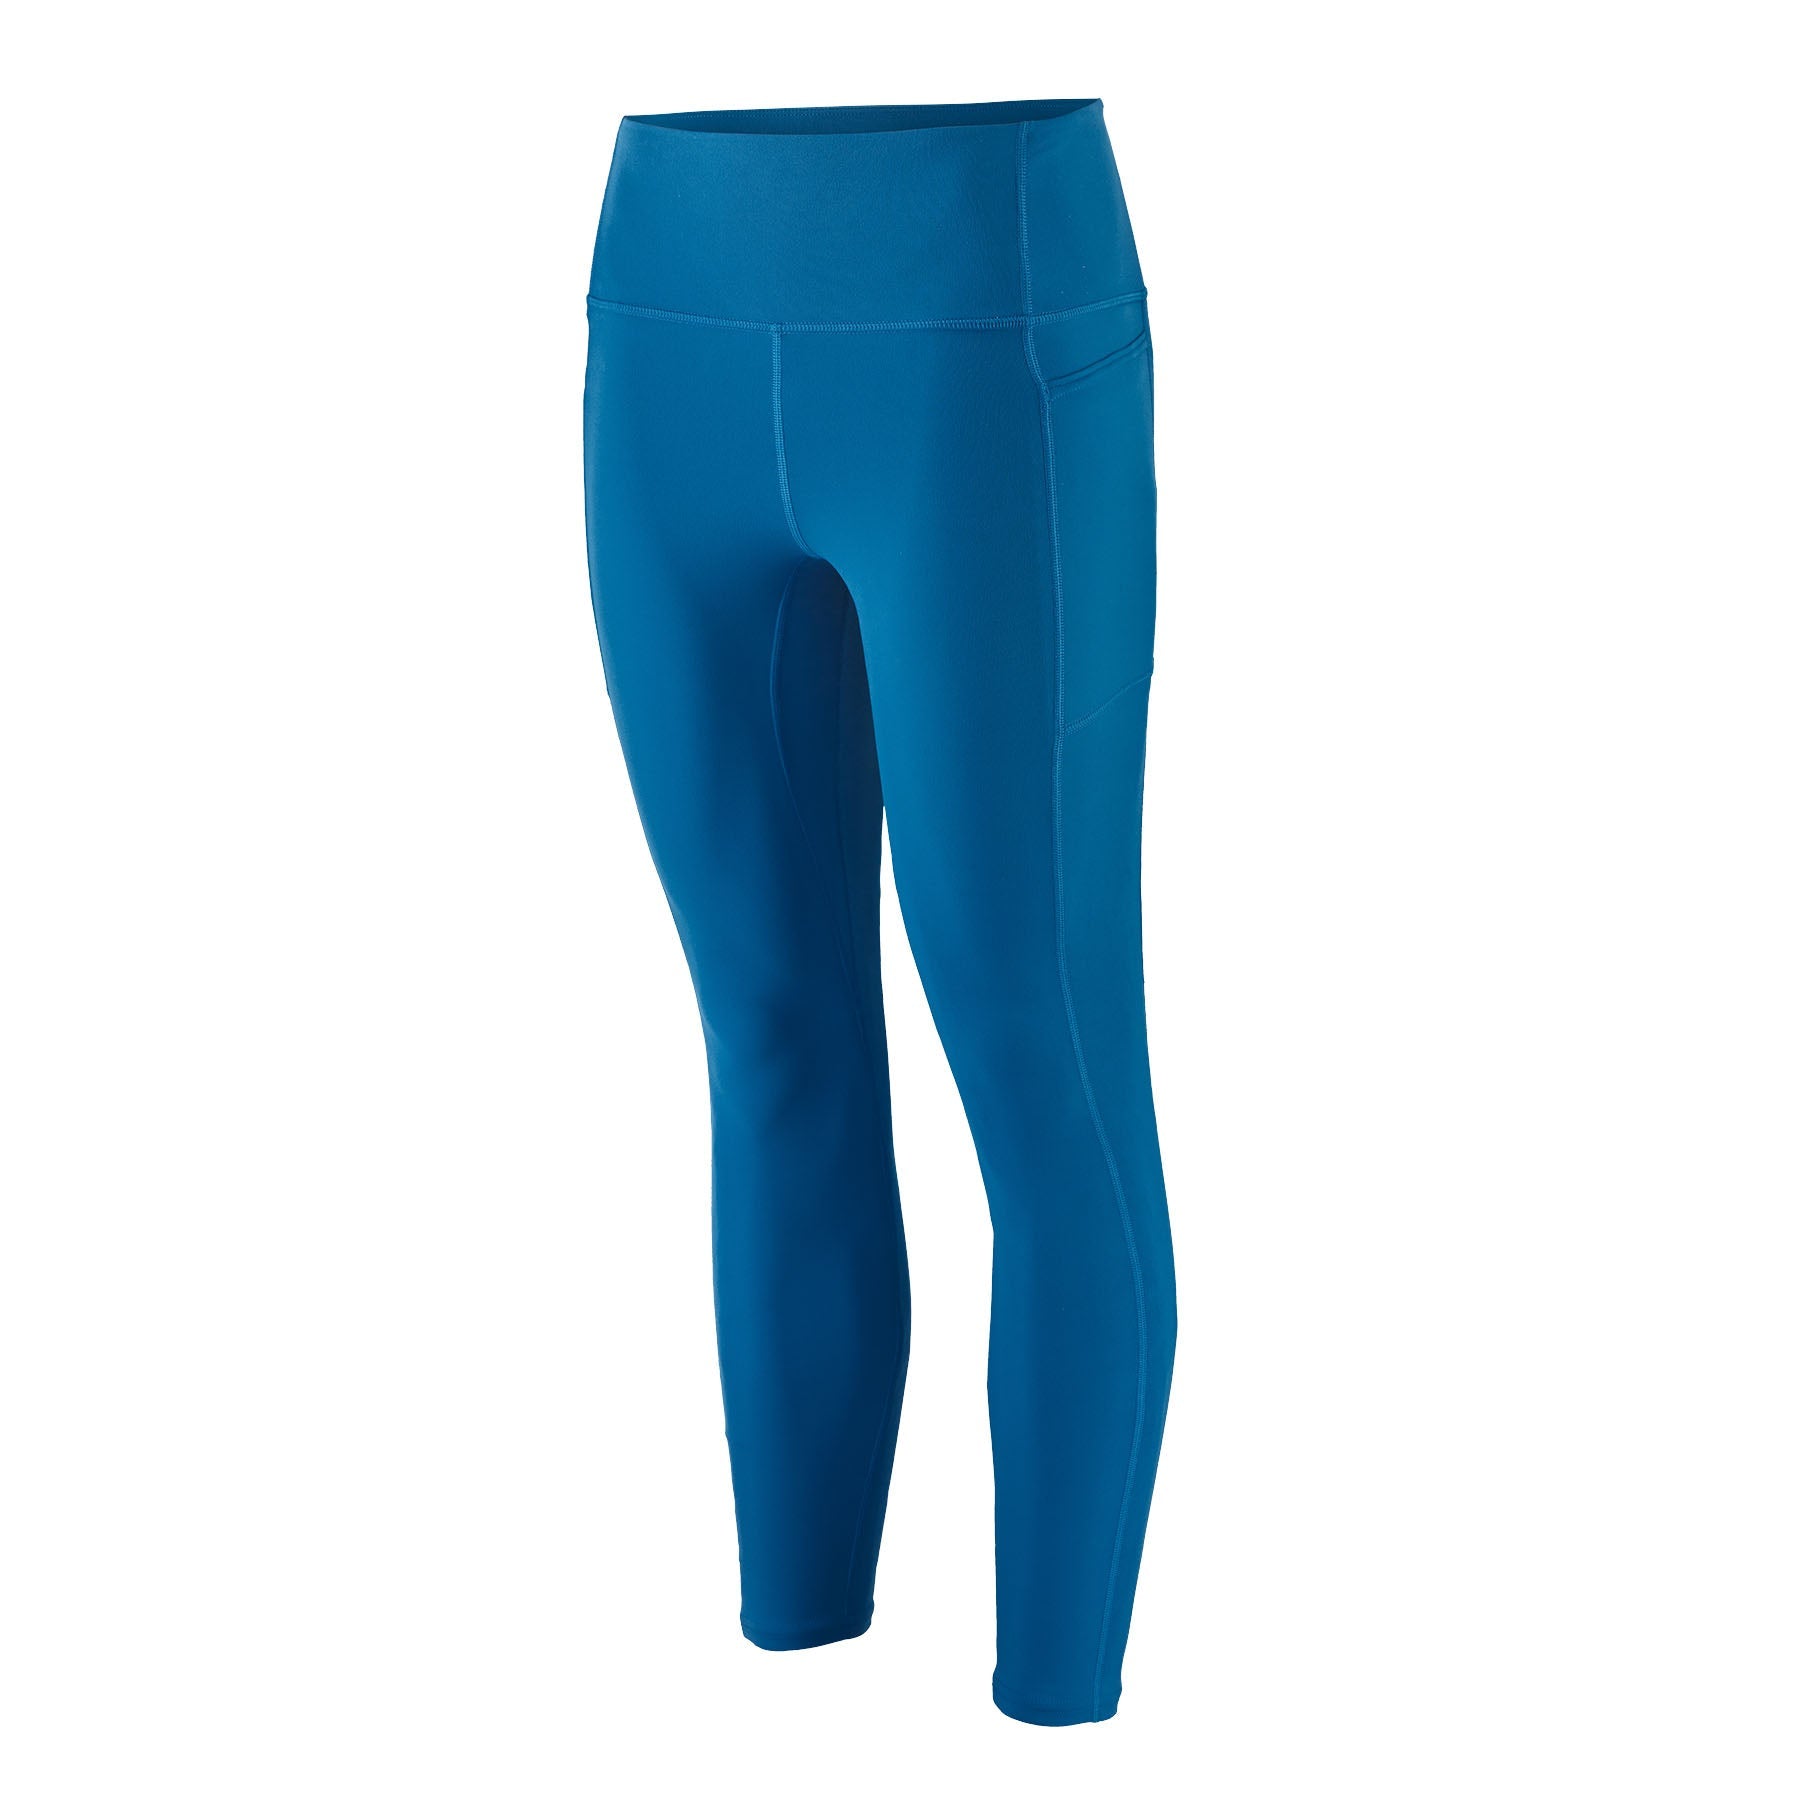 Women's Maipo 7/8 Stash Tights in Endless Blue | Patagonia Bend